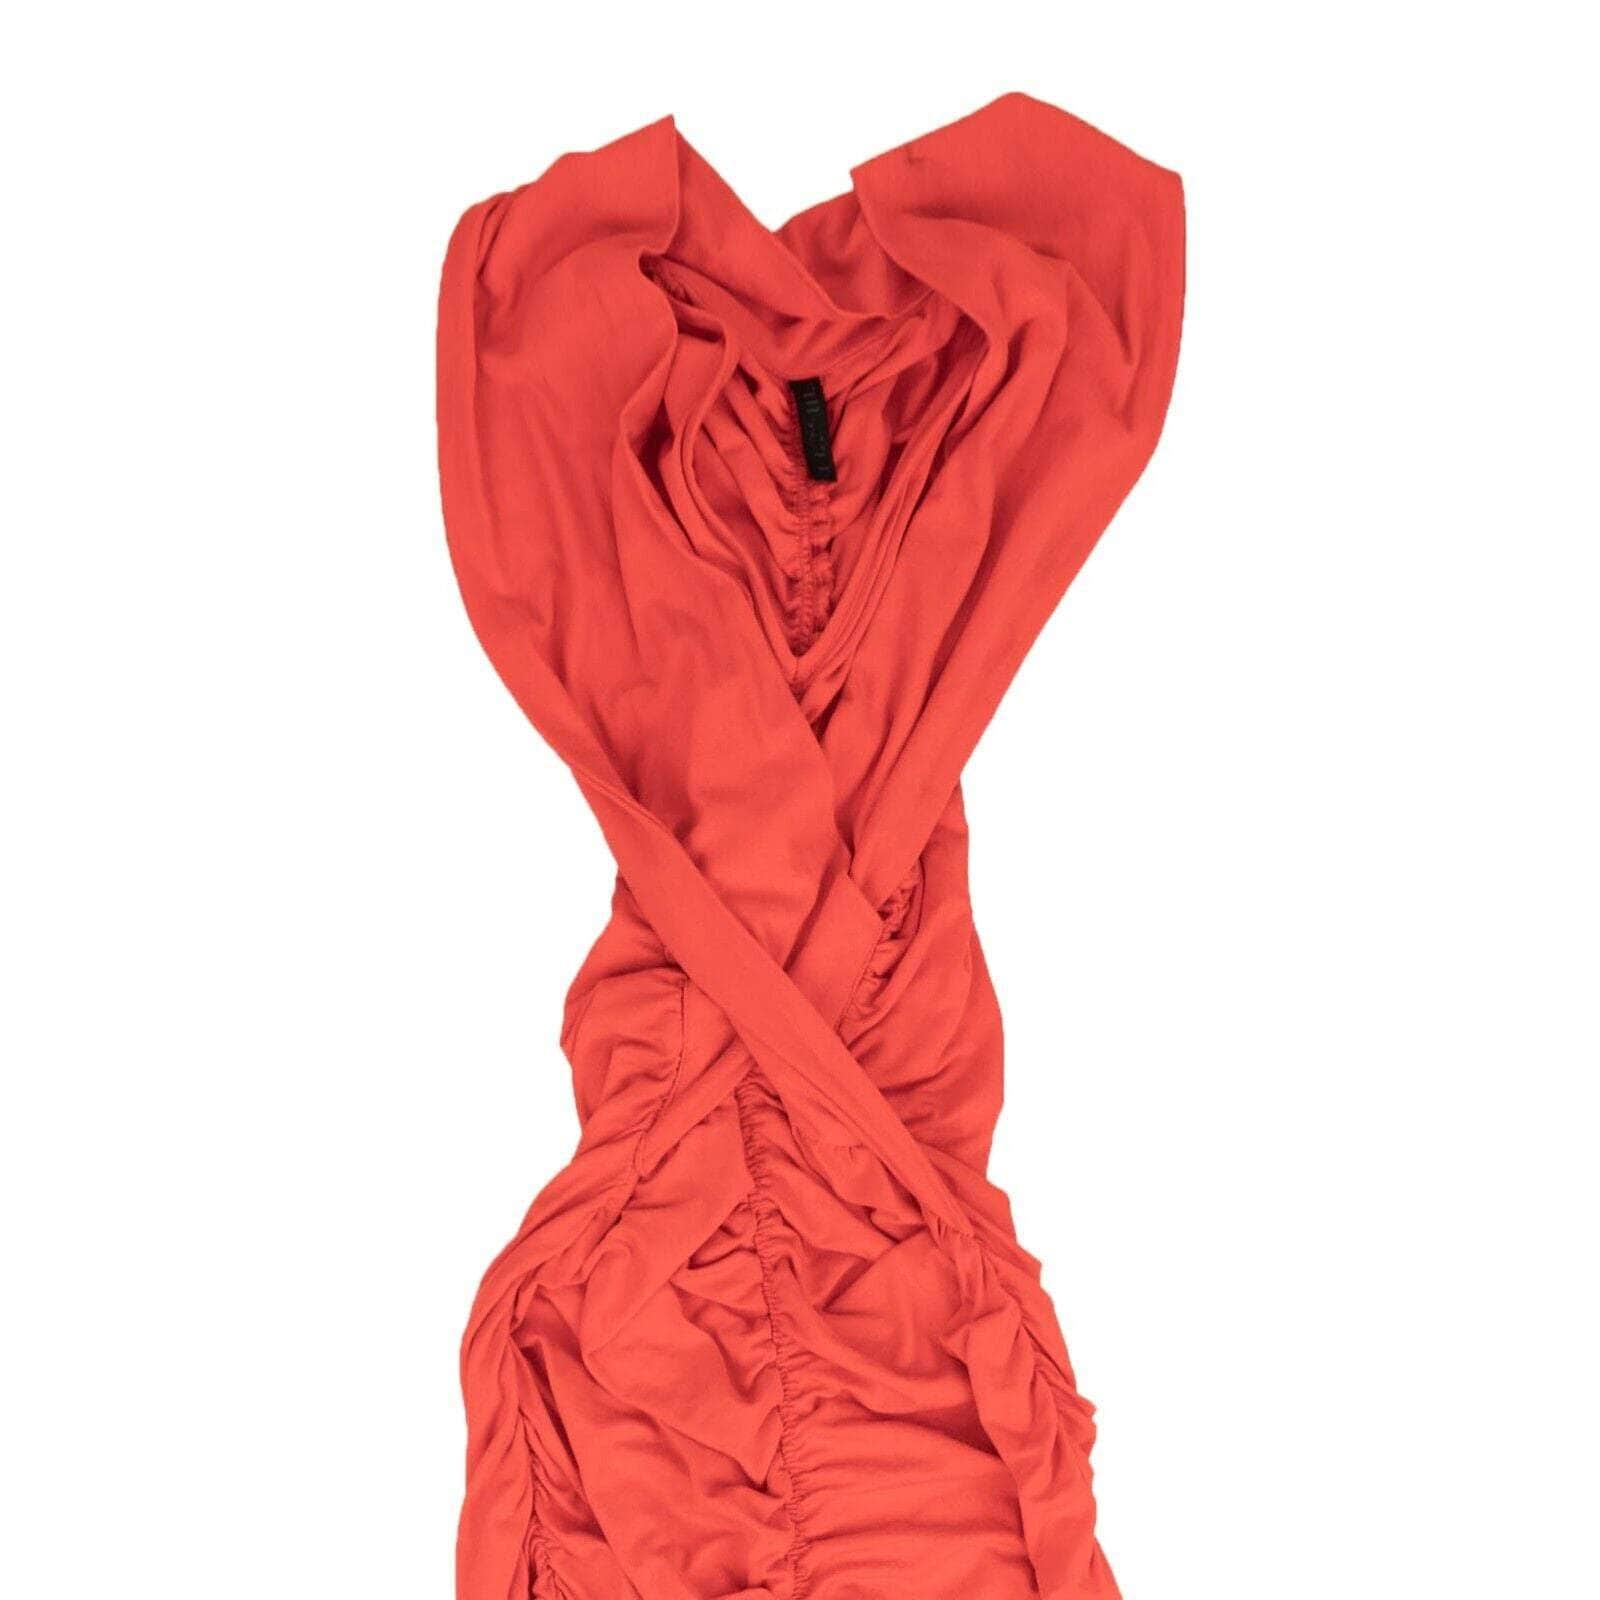 Unravel Project 250-500, channelenable-all, chicmi, couponcollection, gender-womens, main-clothing, size-s, unravel-project, womens-day-dresses S Red Cinched Sleeveless Train Dress 82NGG-UN-28/S 82NGG-UN-28/S